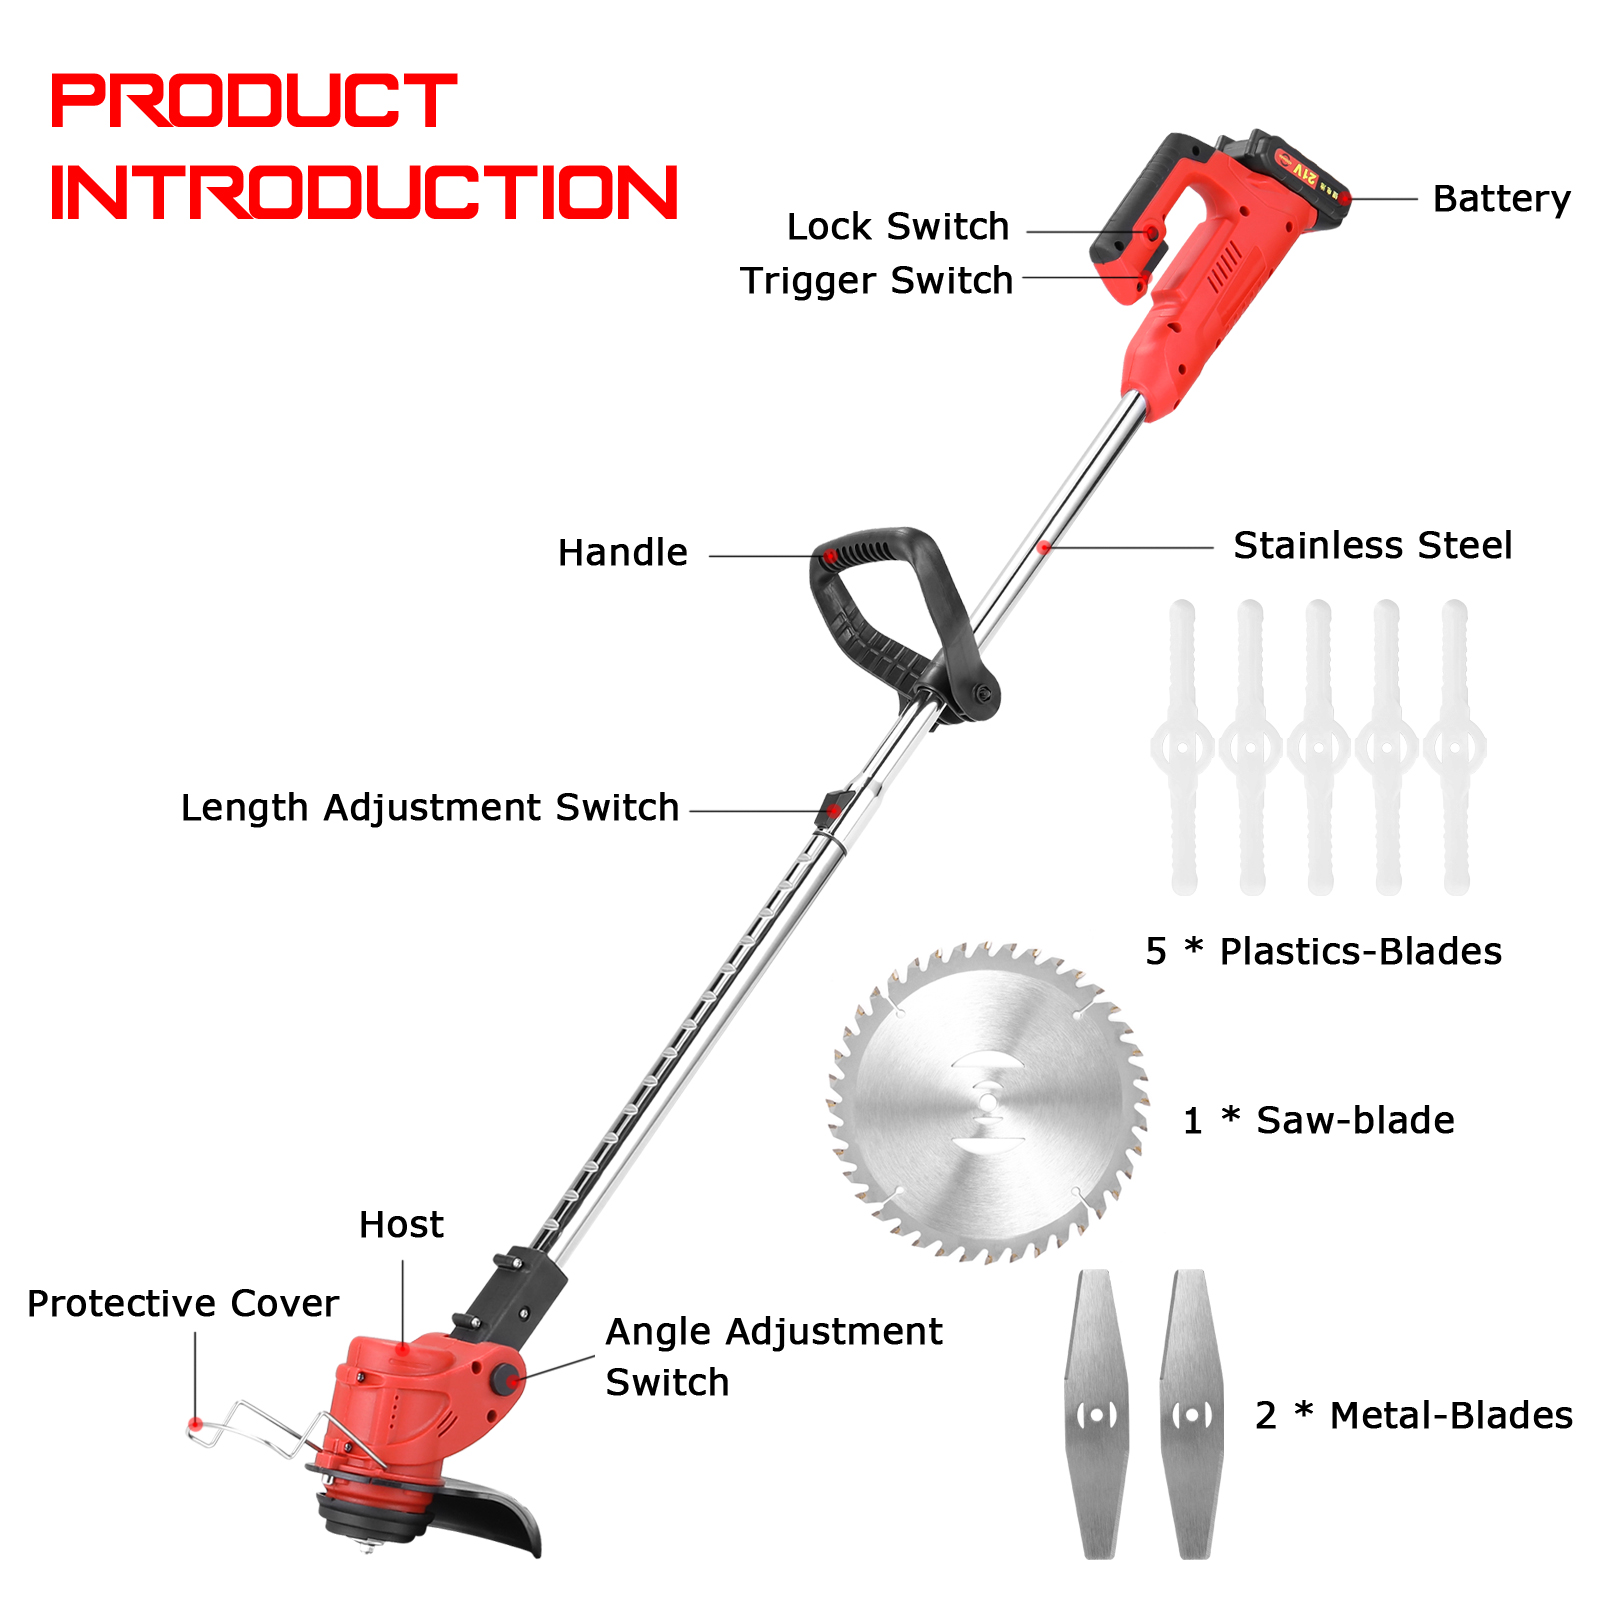 21V Electric Lawn Mower Cordless Household Grass Trimmer Cutter Portable Pruning Garden Tool Lawn Mower